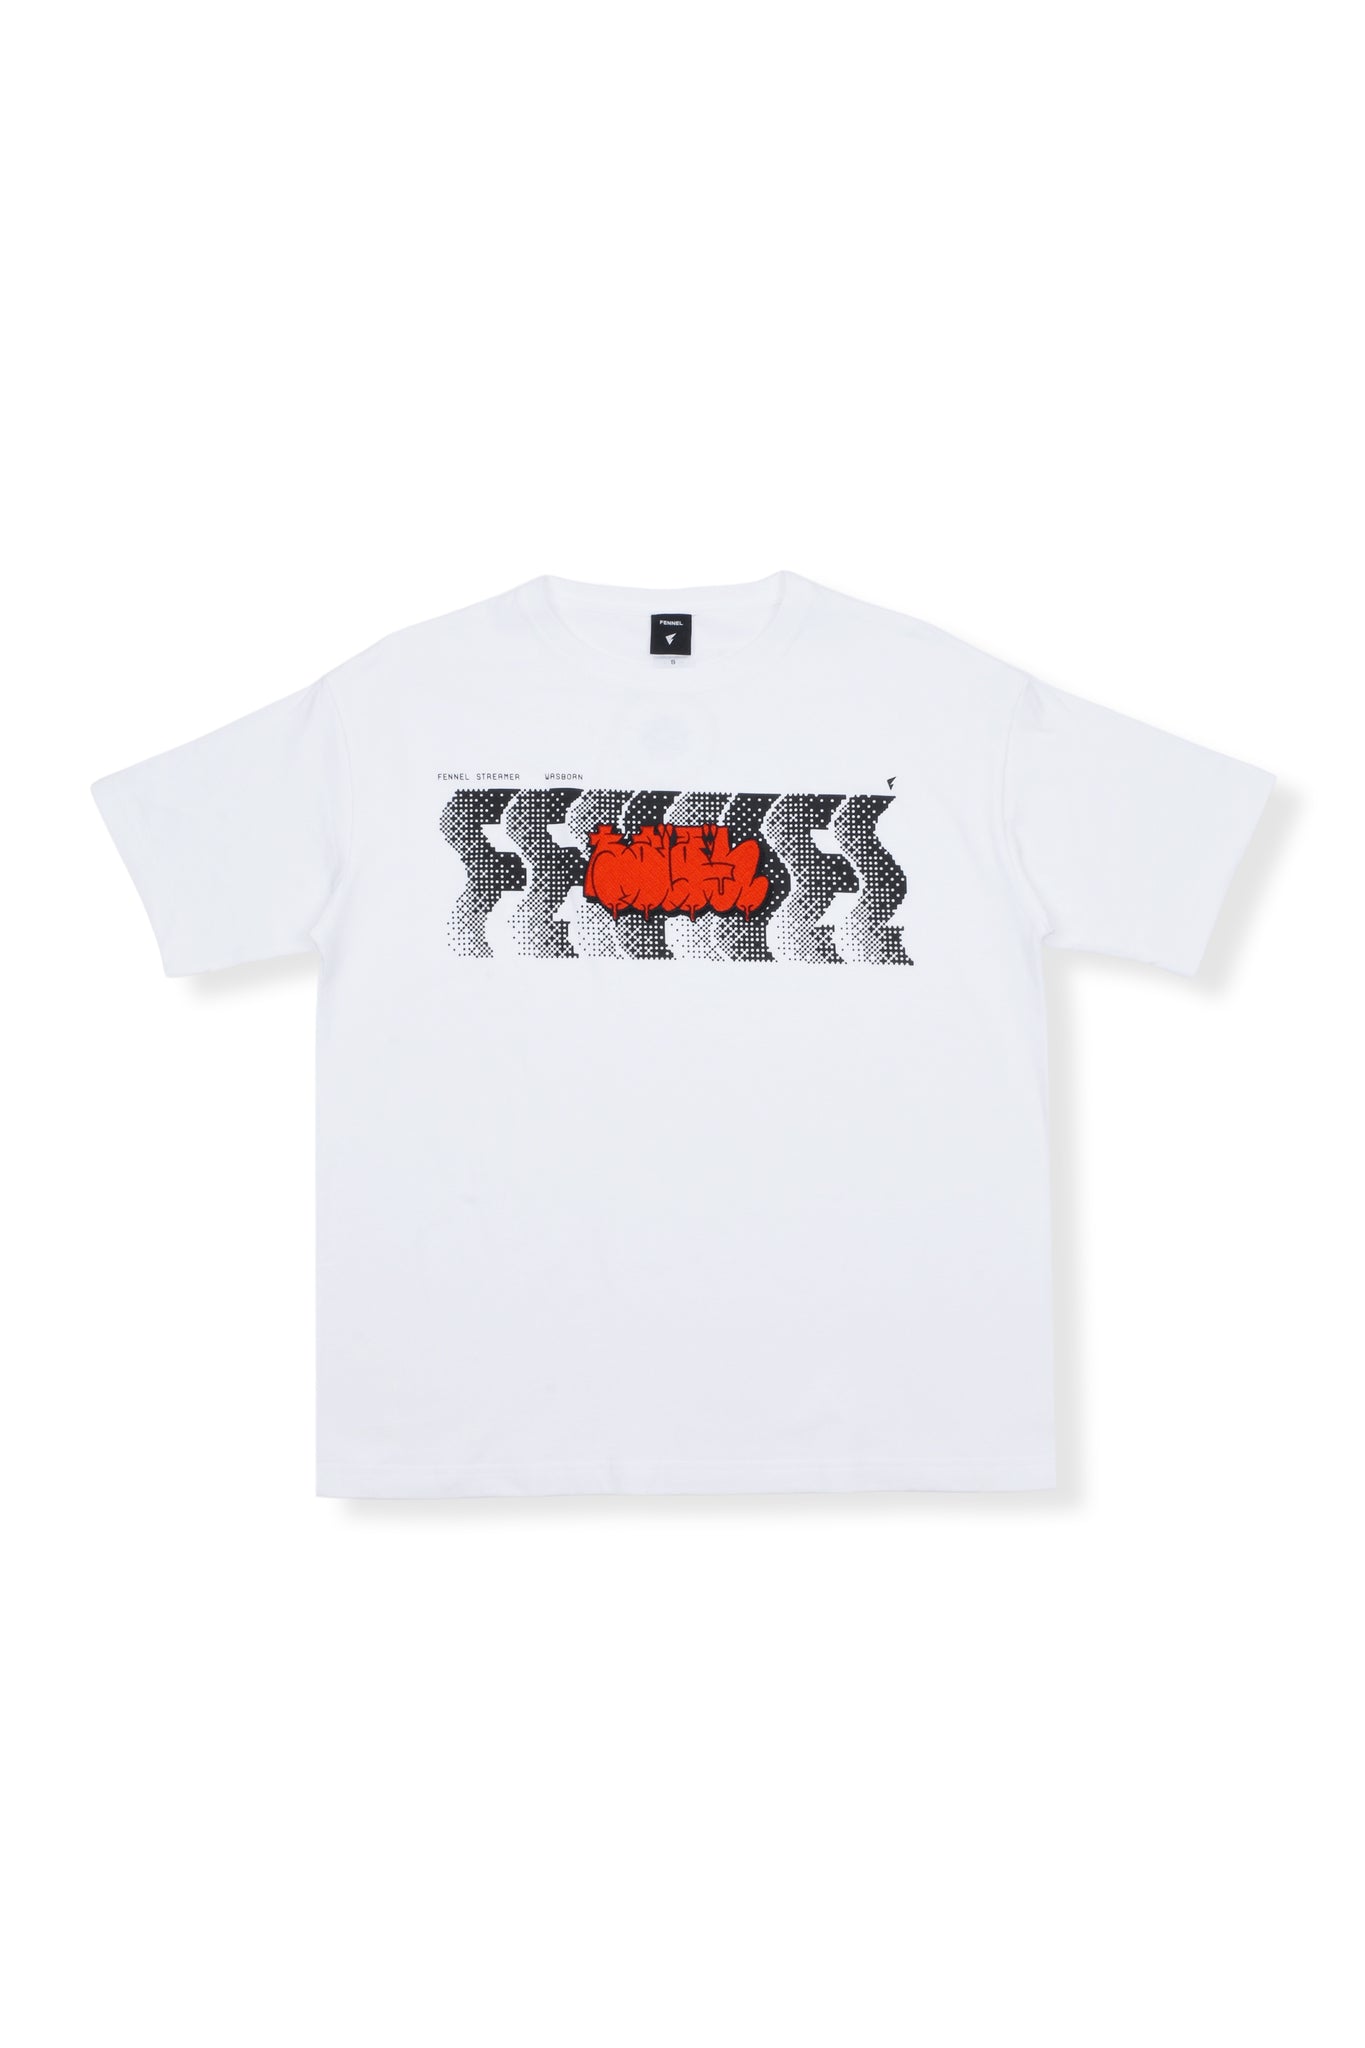 WASBORN PATCHED T-SHIRT/WHITE